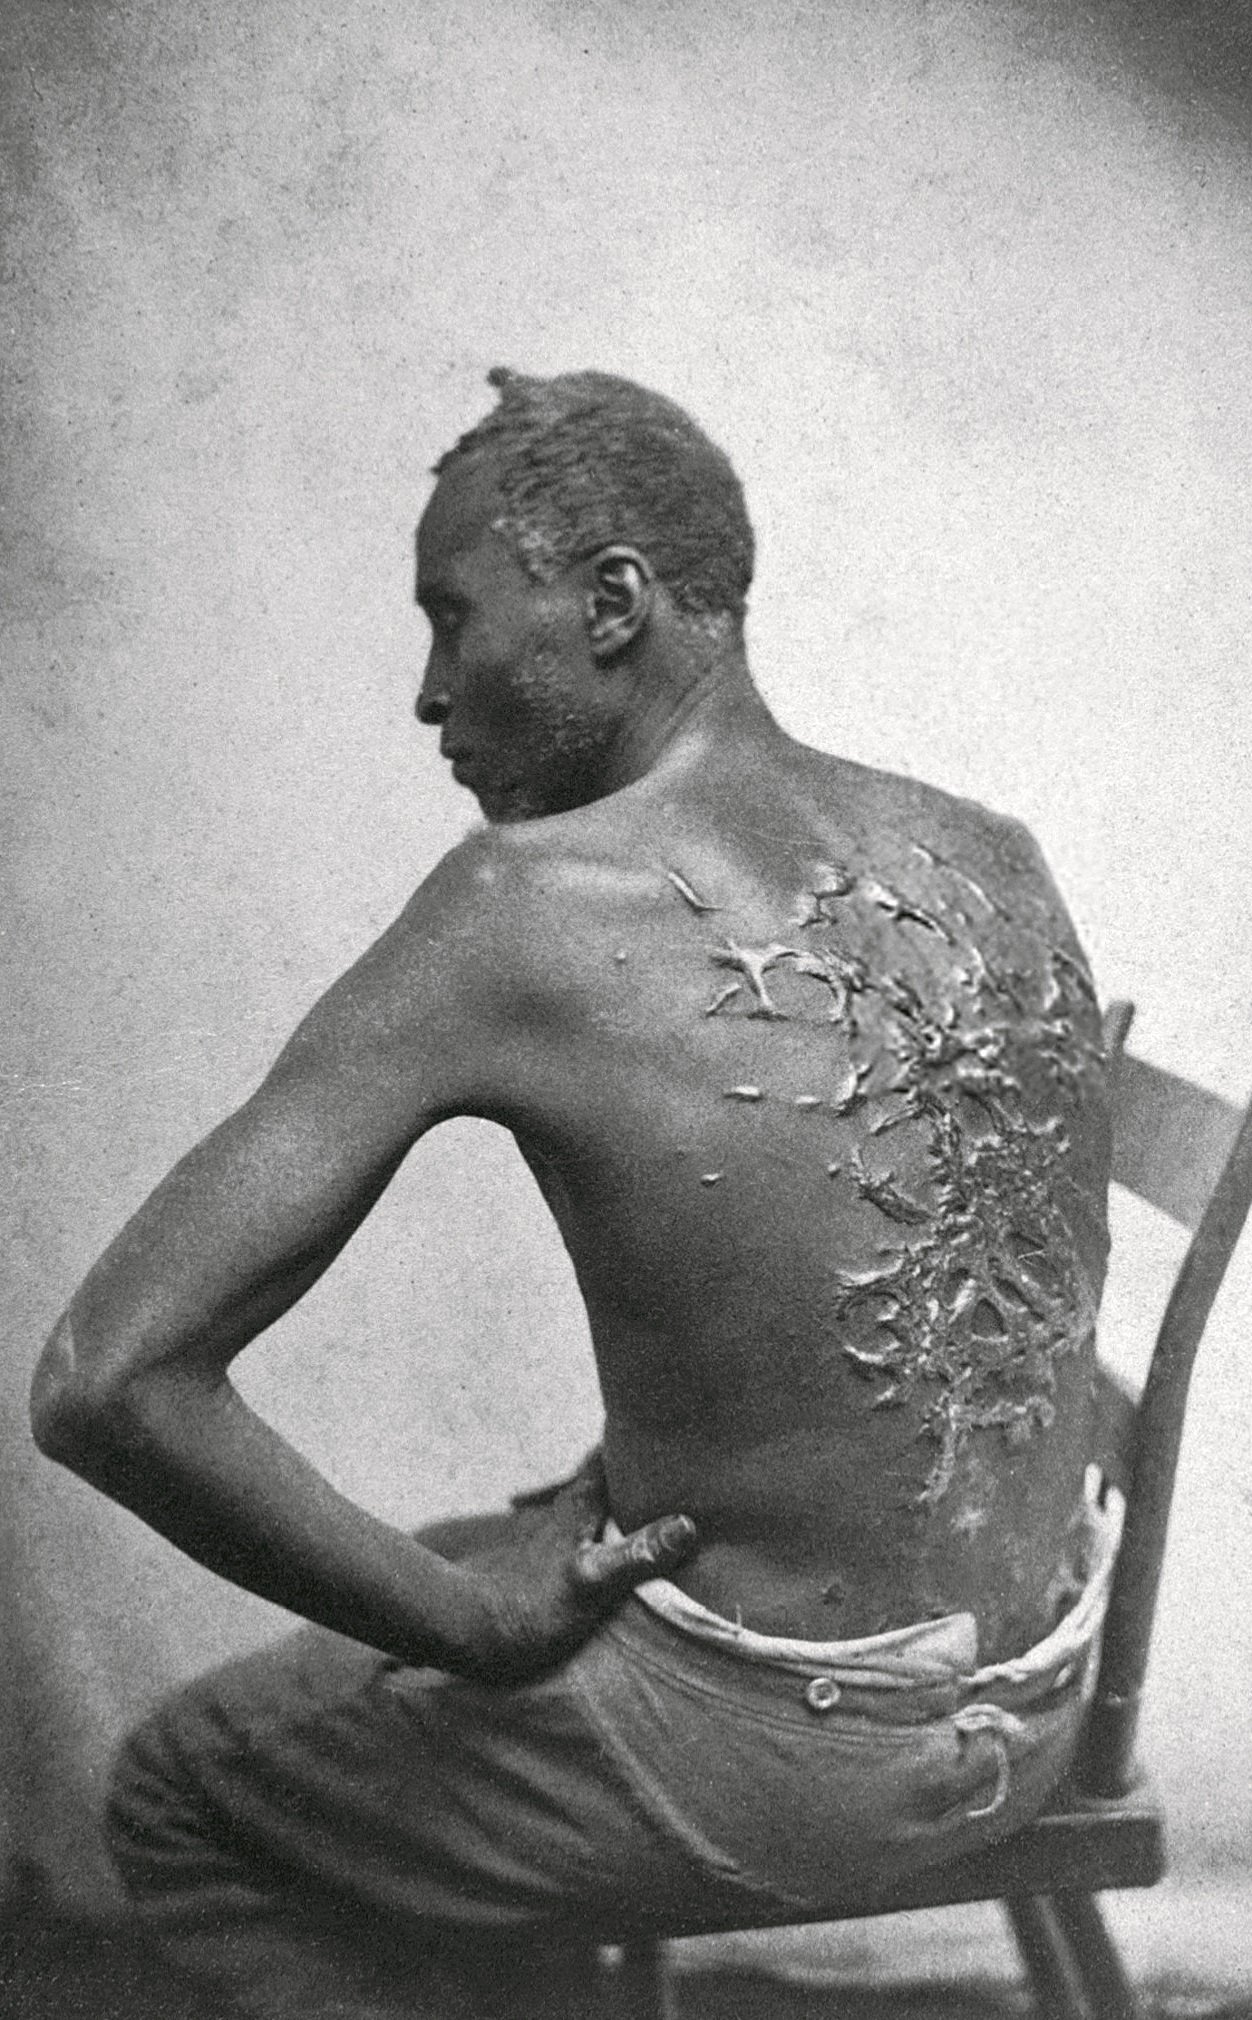 scourged_back_by_mcpherson_oliver_1863_retouched.jpg